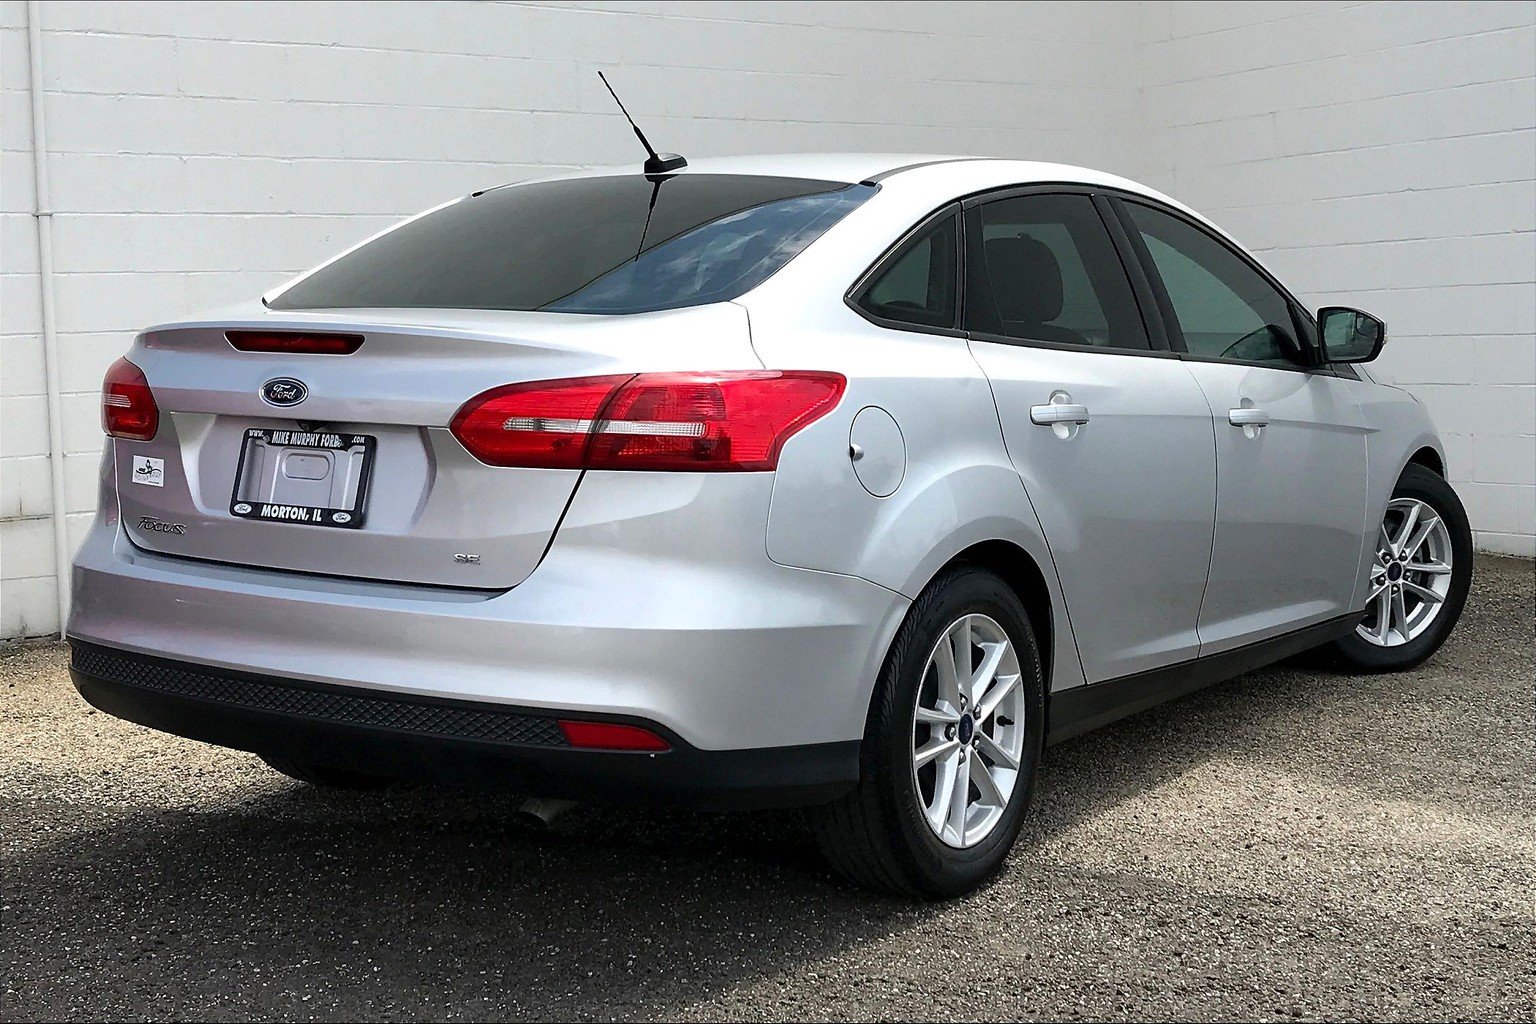 Pre-Owned 2015 Ford Focus SE 4D Sedan in Morton #256603 | Mike Murphy Ford